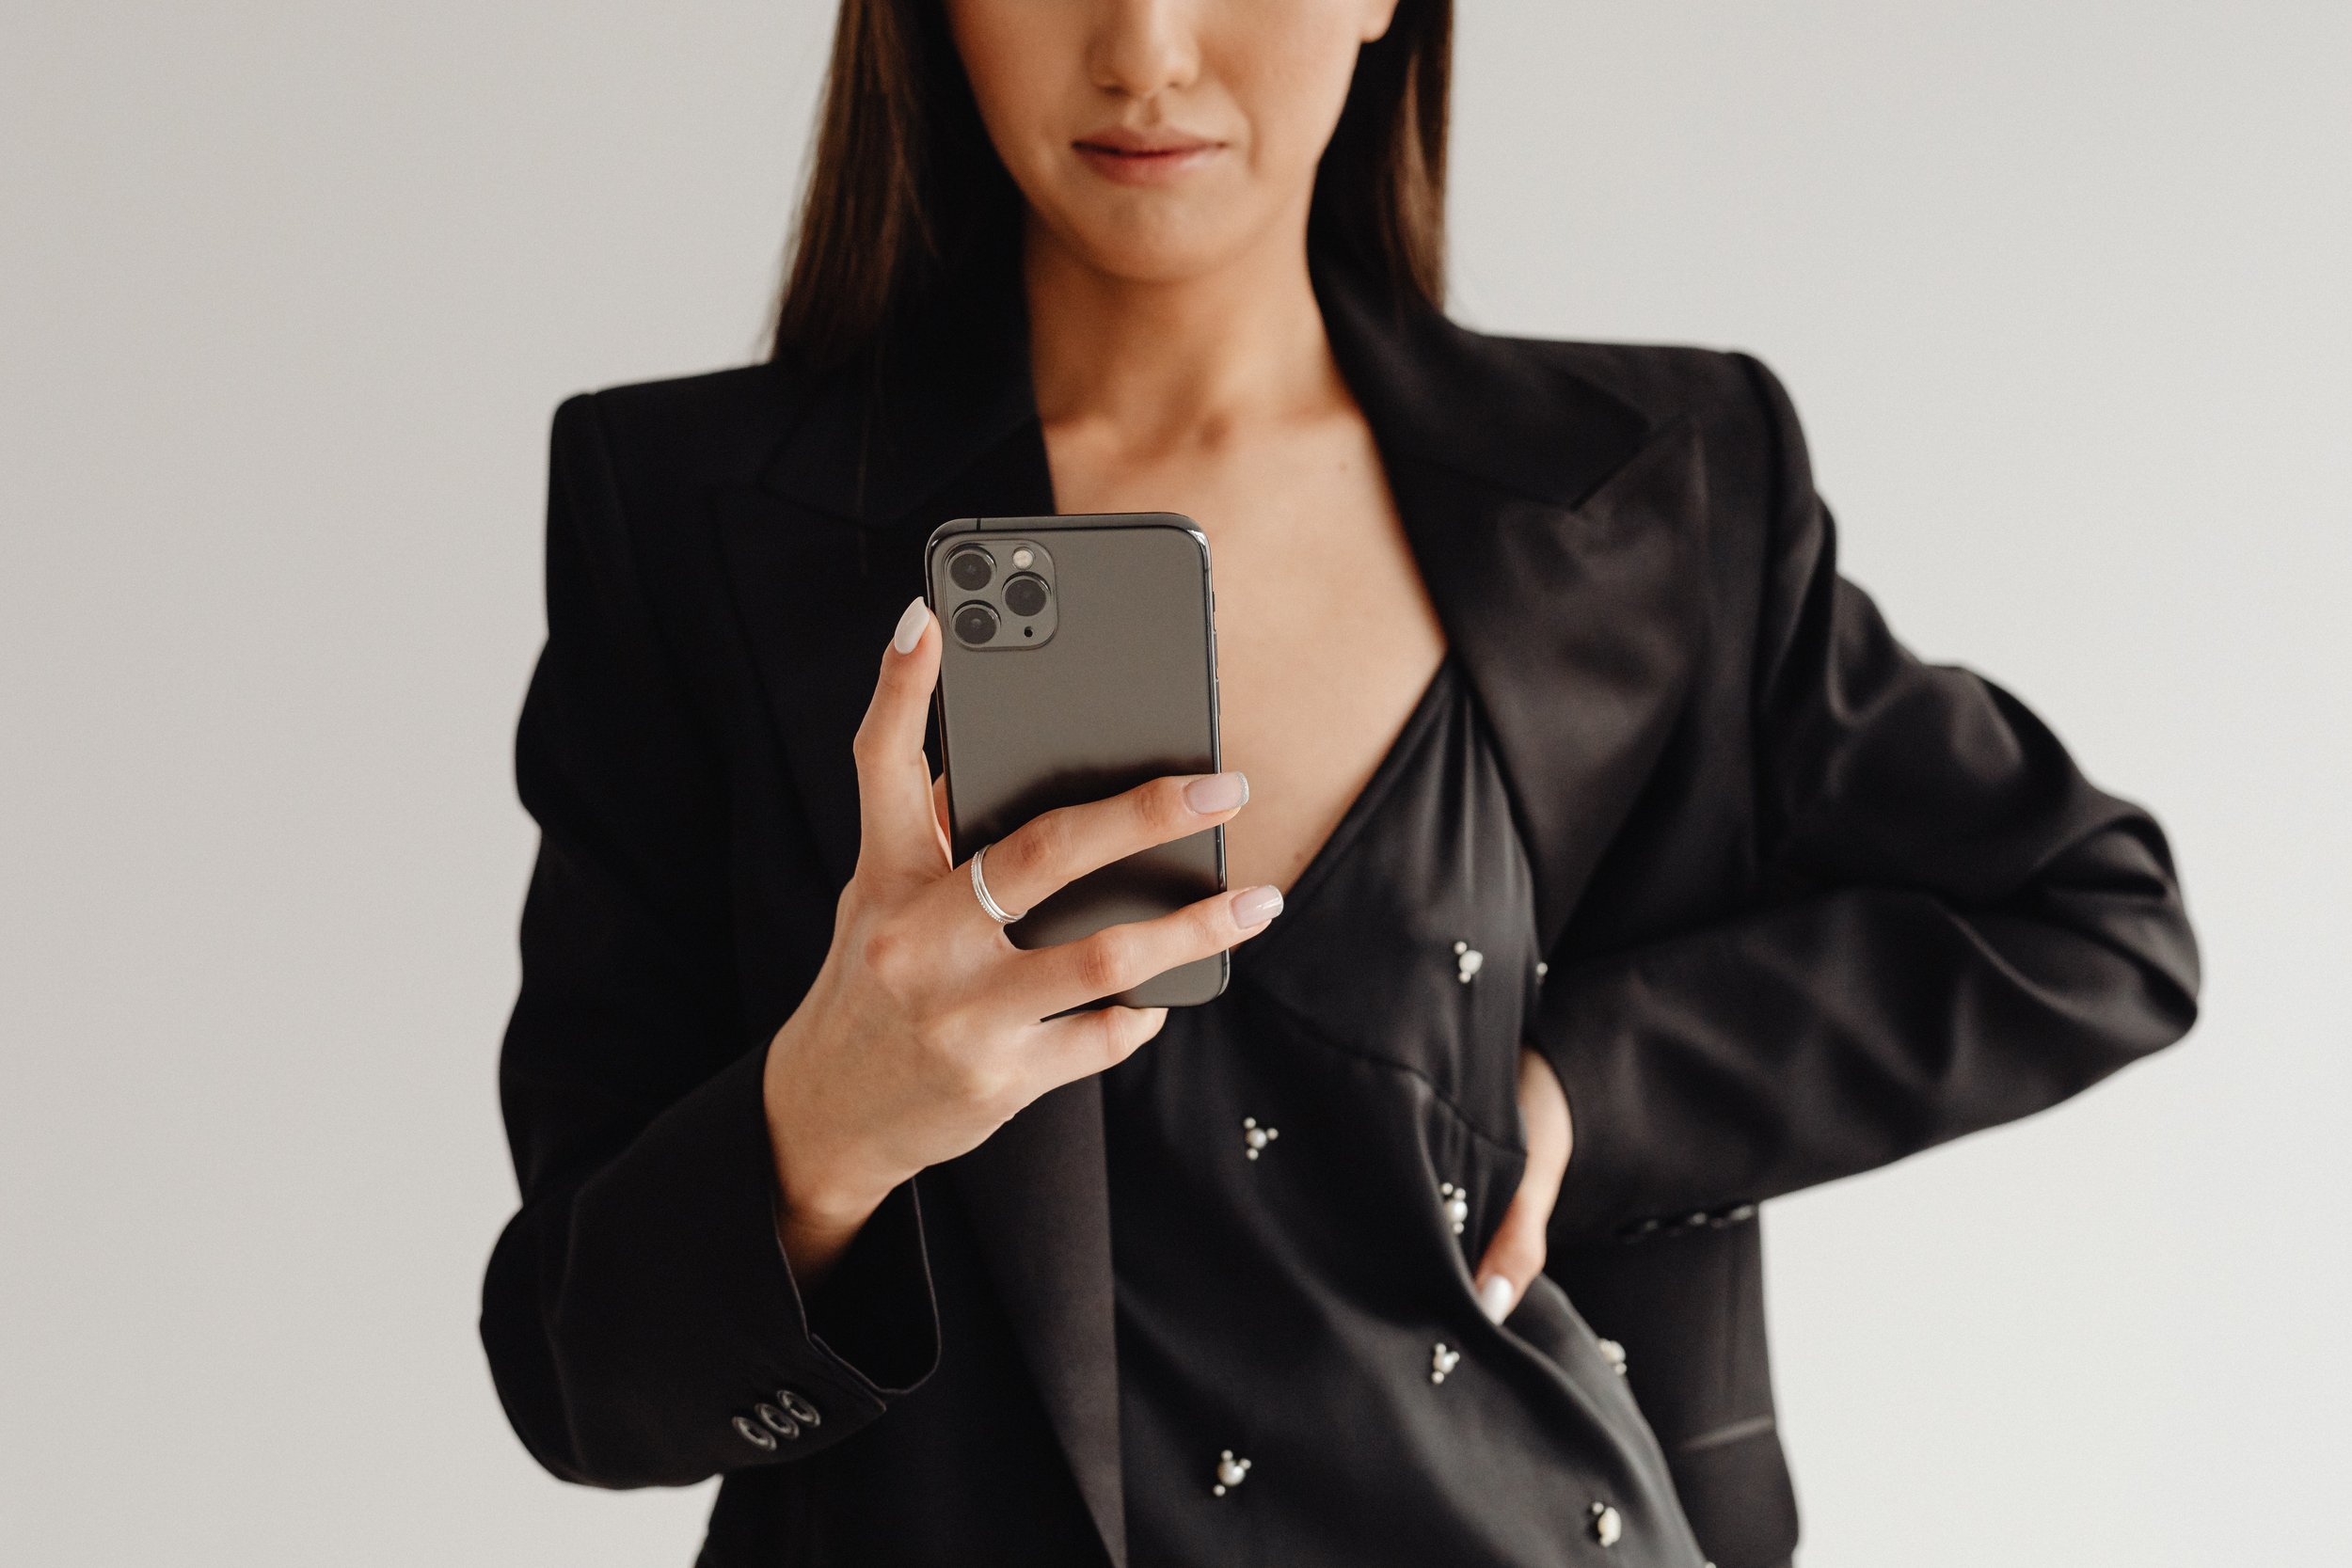 kaboompics_dark-classy-aesthetic-fashion-beautiful-asian-female-entrepreneur-in-black-suit-technology-and-devices-iphone-laptop-airpods-30092